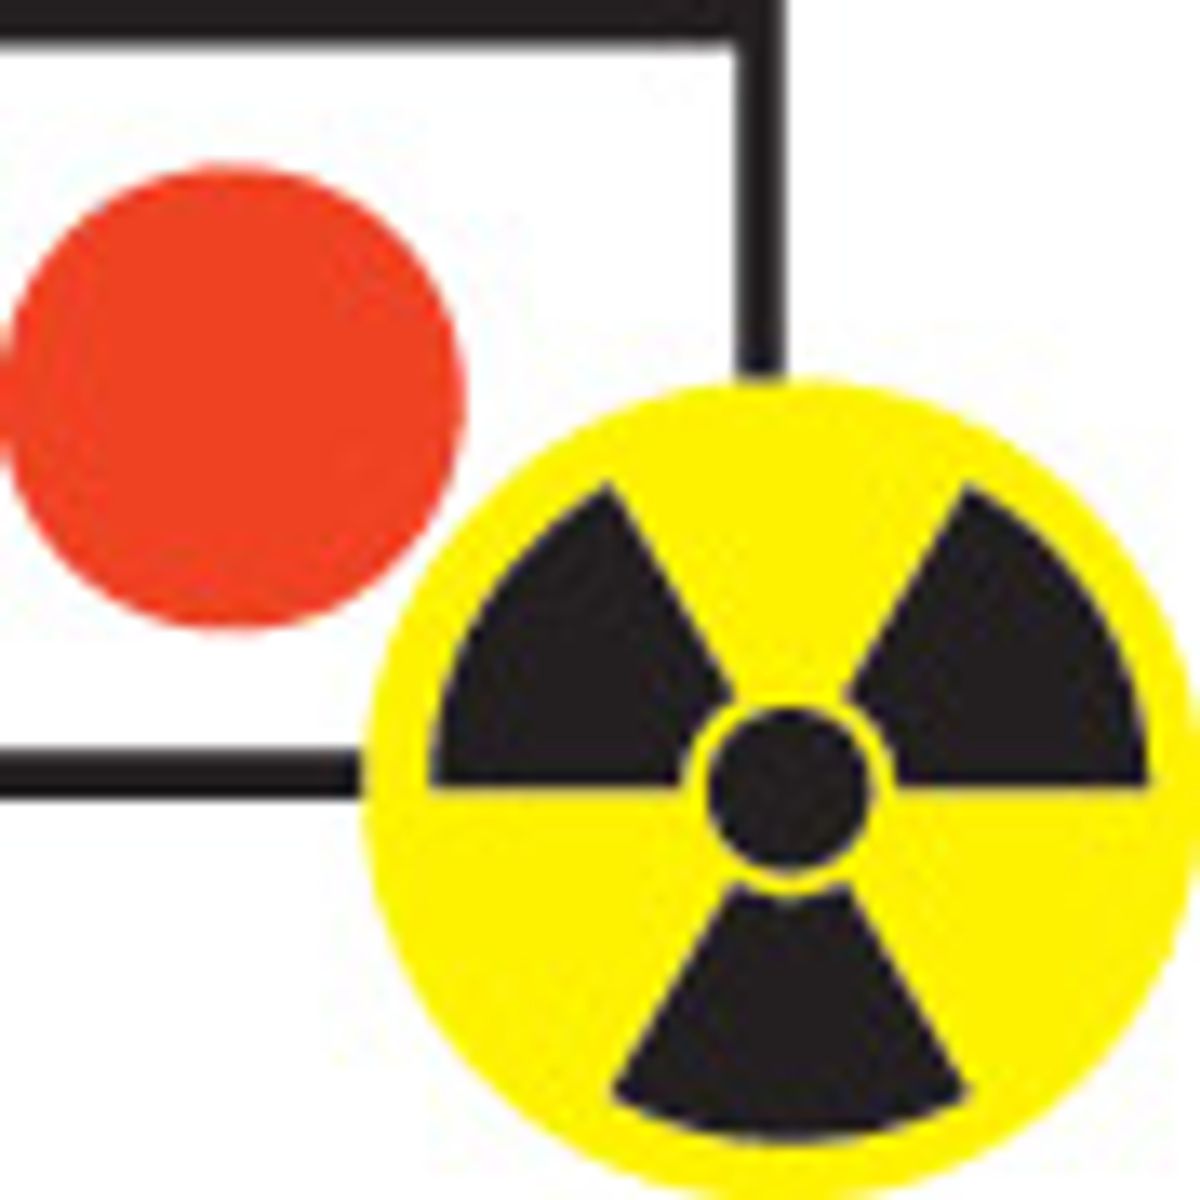 Covering Fukushima With a Little Help From Our Friends